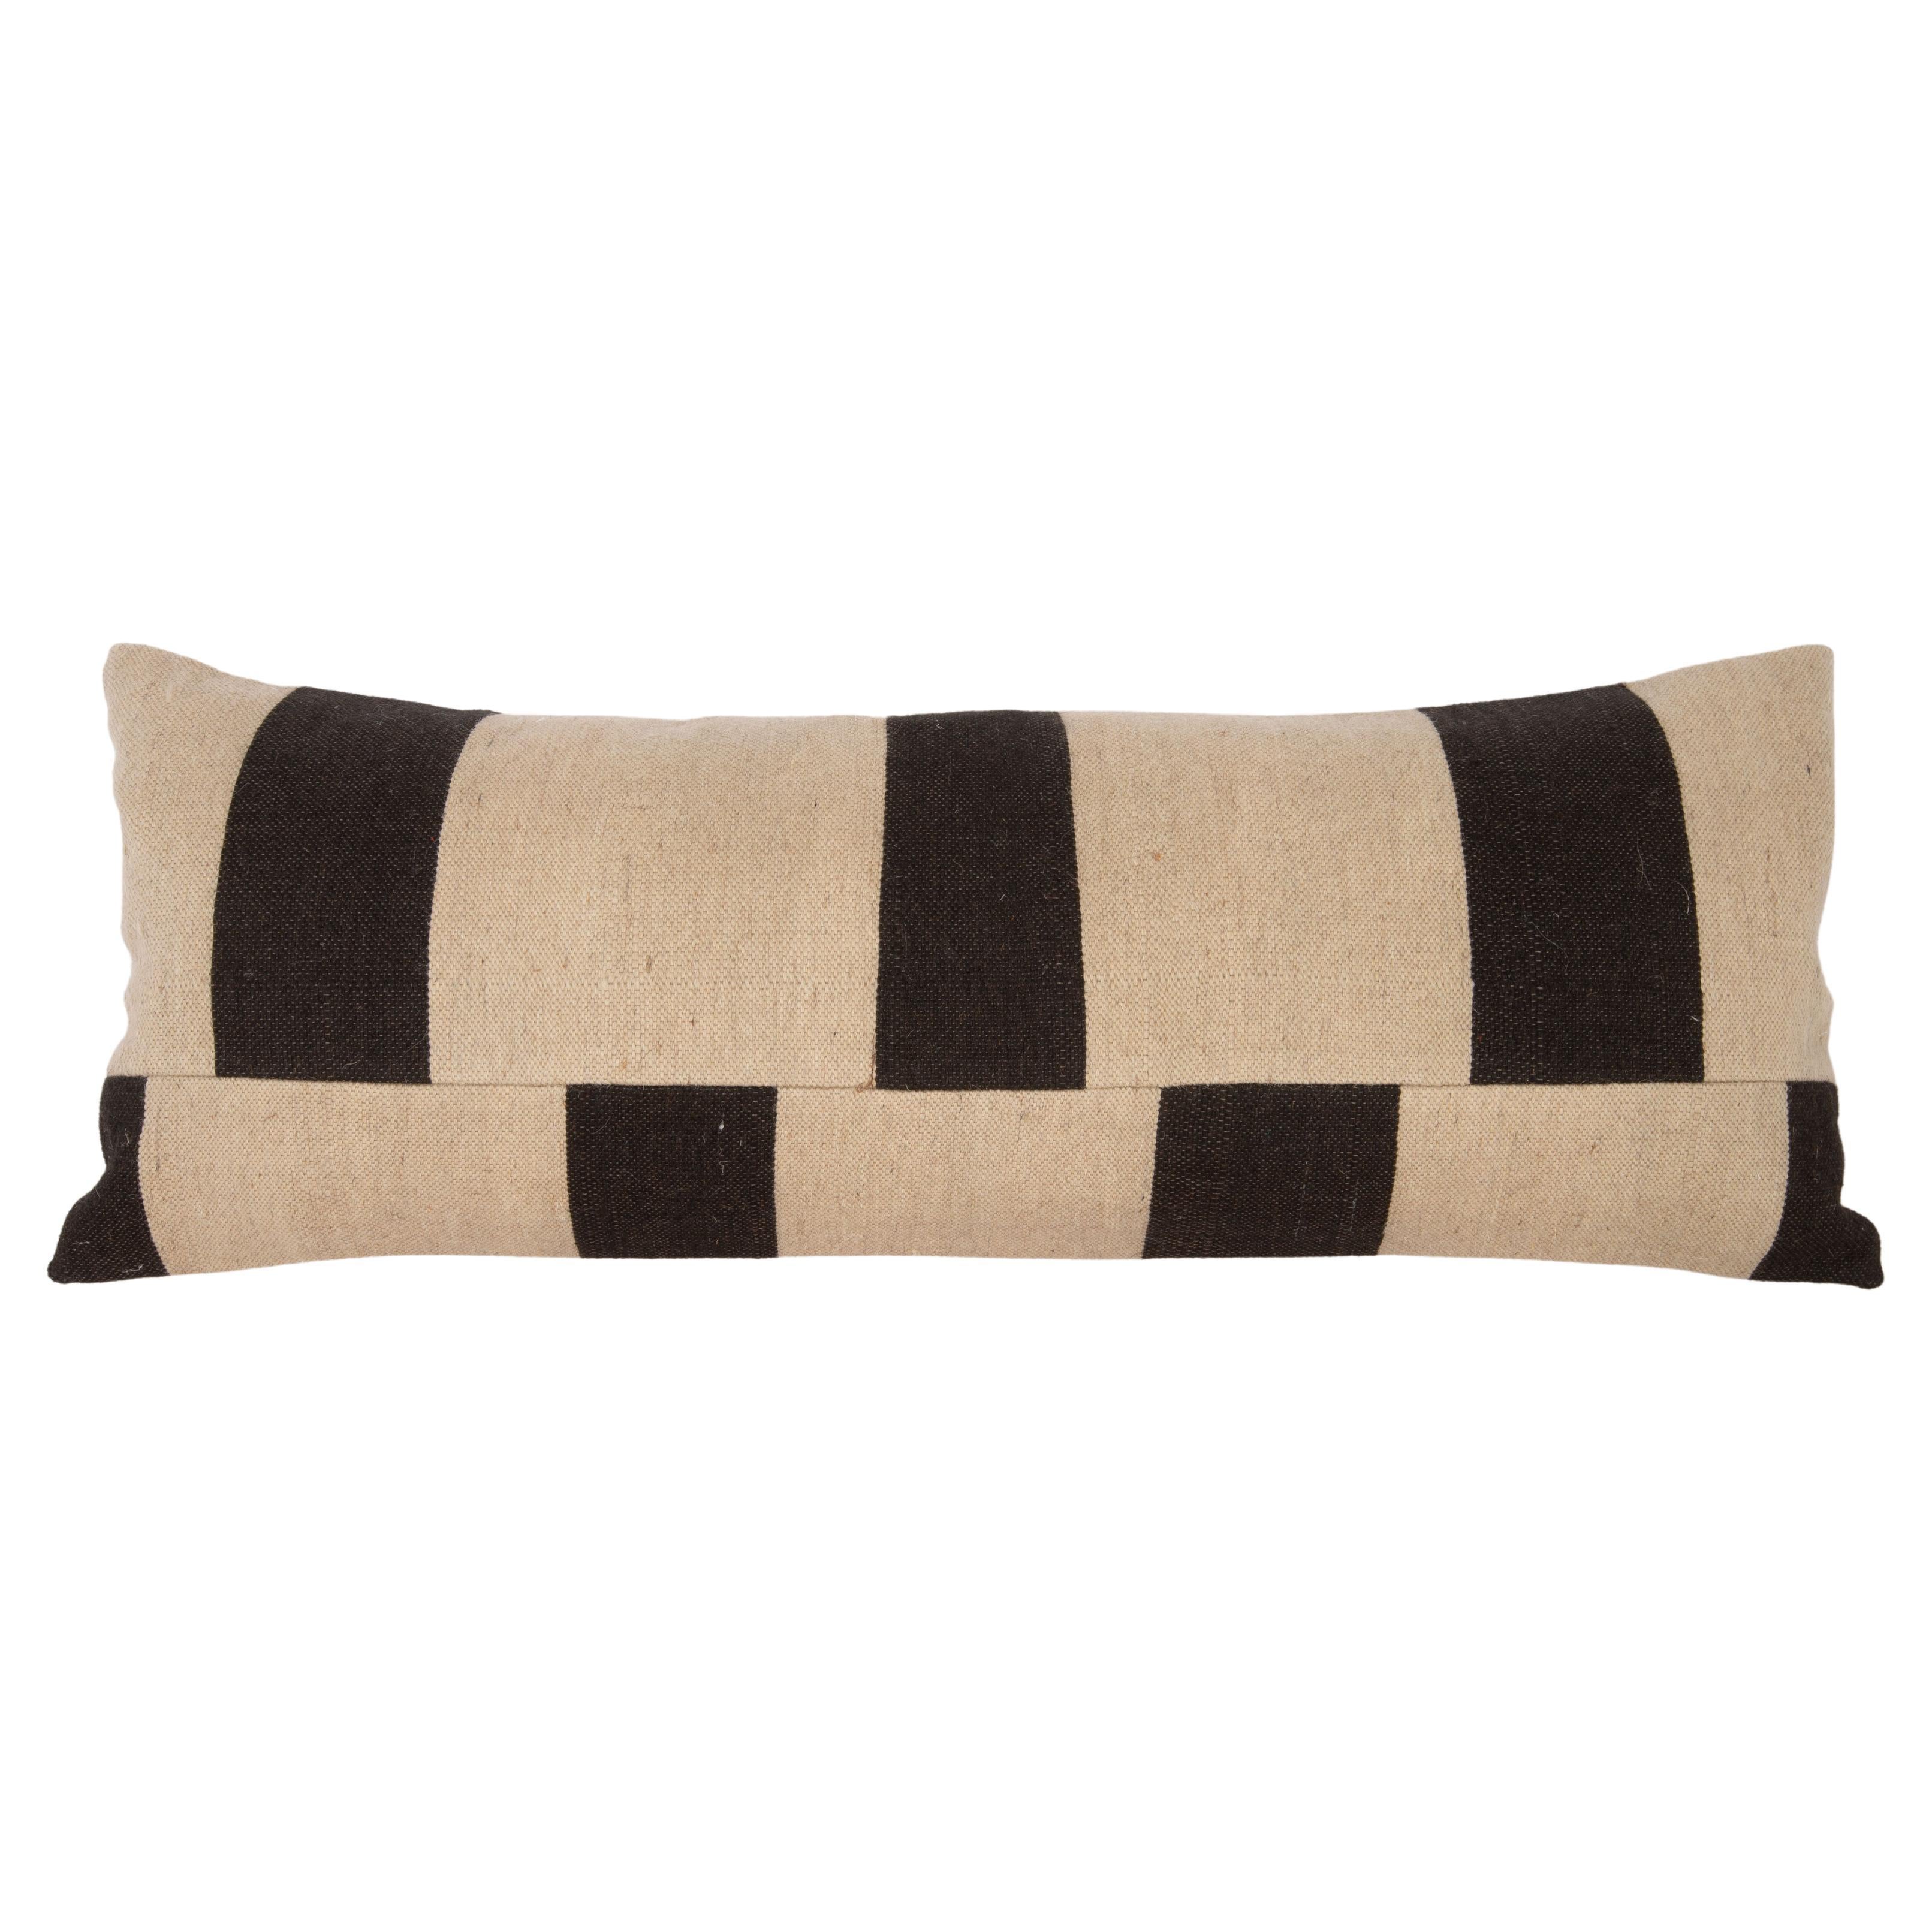 Black and White Lumbar Pillow Cover Made from a Contemporary Textile For Sale